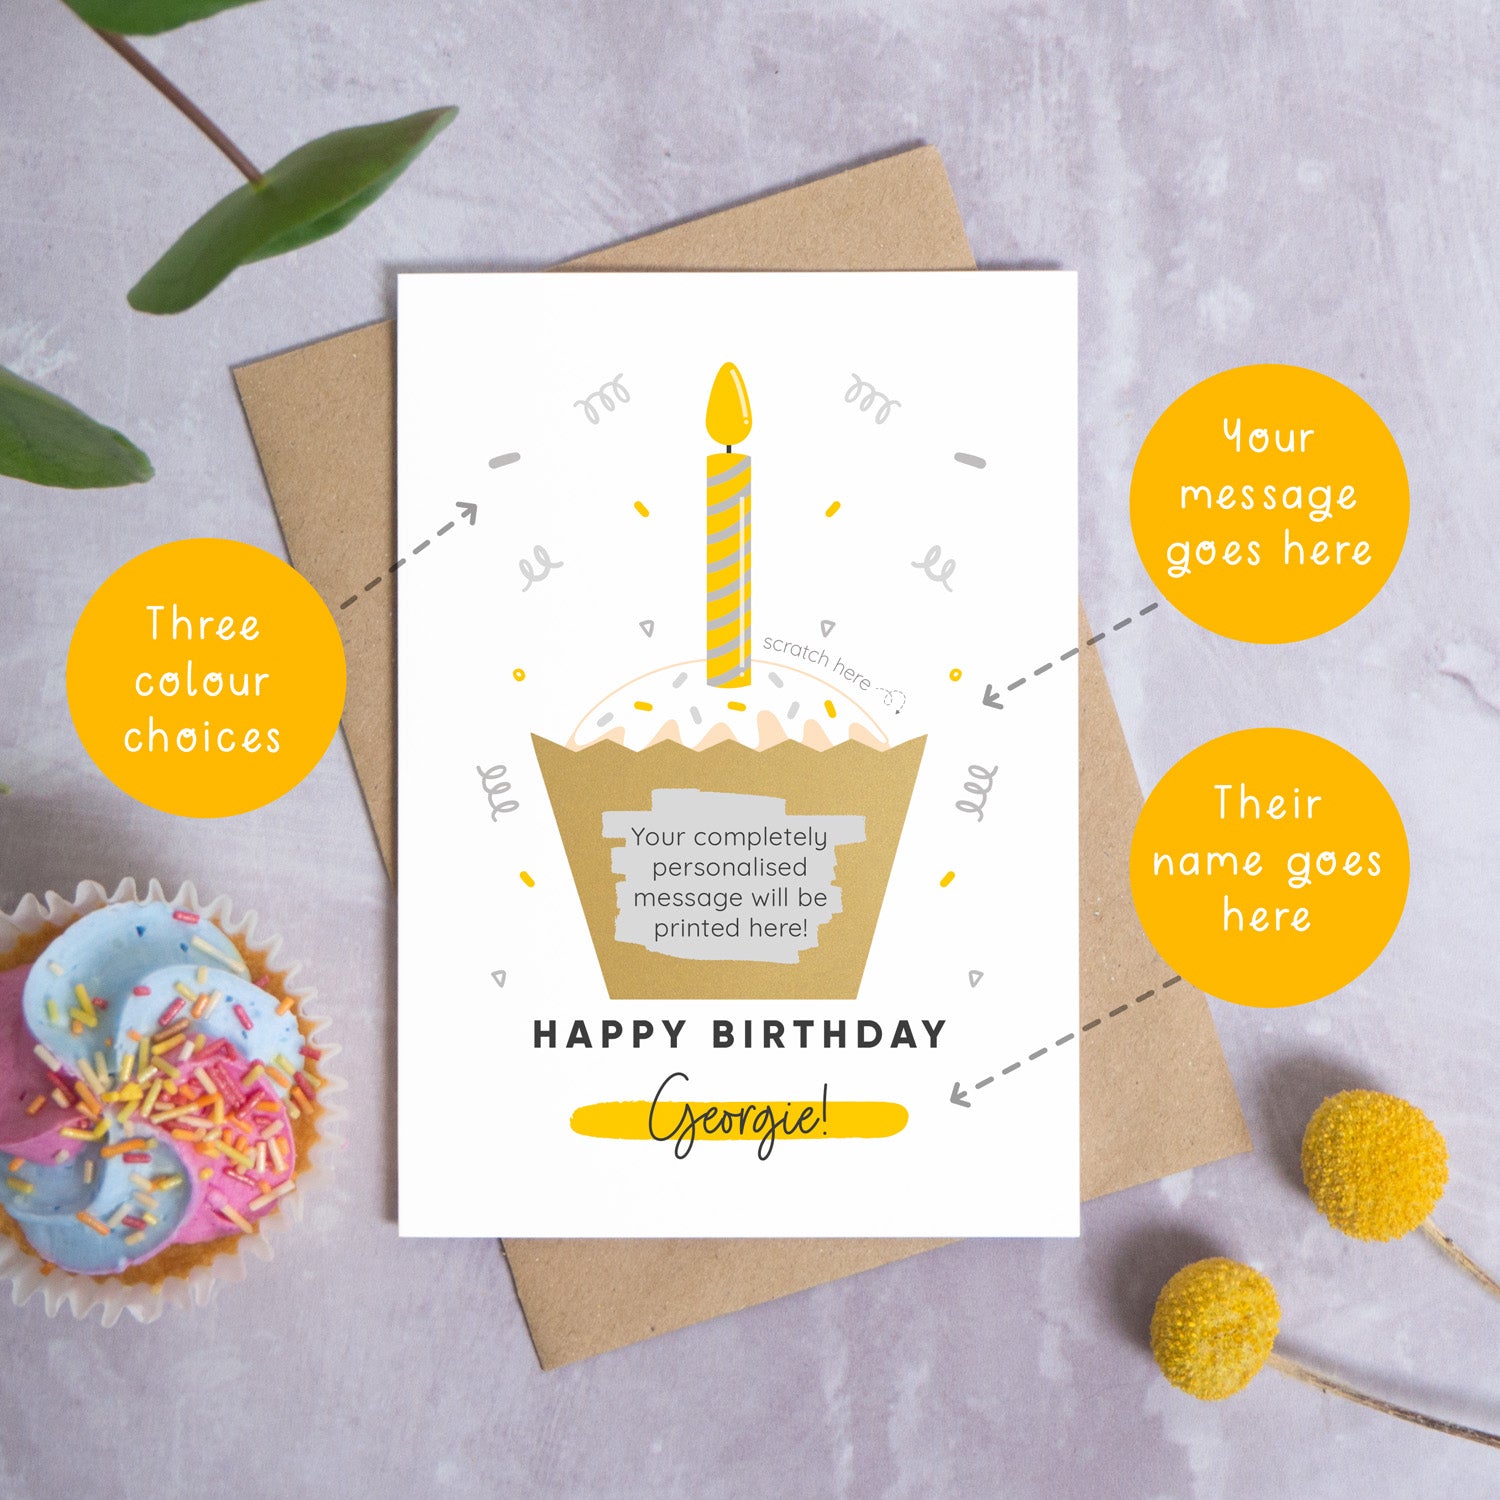 The birthday cake scratch card lying down top of a kraft brown envelope on a grey background surrounded by leaves, a pen and circles explaining the various points of that card that can be personalised. The card features a cupcake with a yellow and grey candle, confetti and still has the gold scratch panel has been scratched to reveal the secret message.